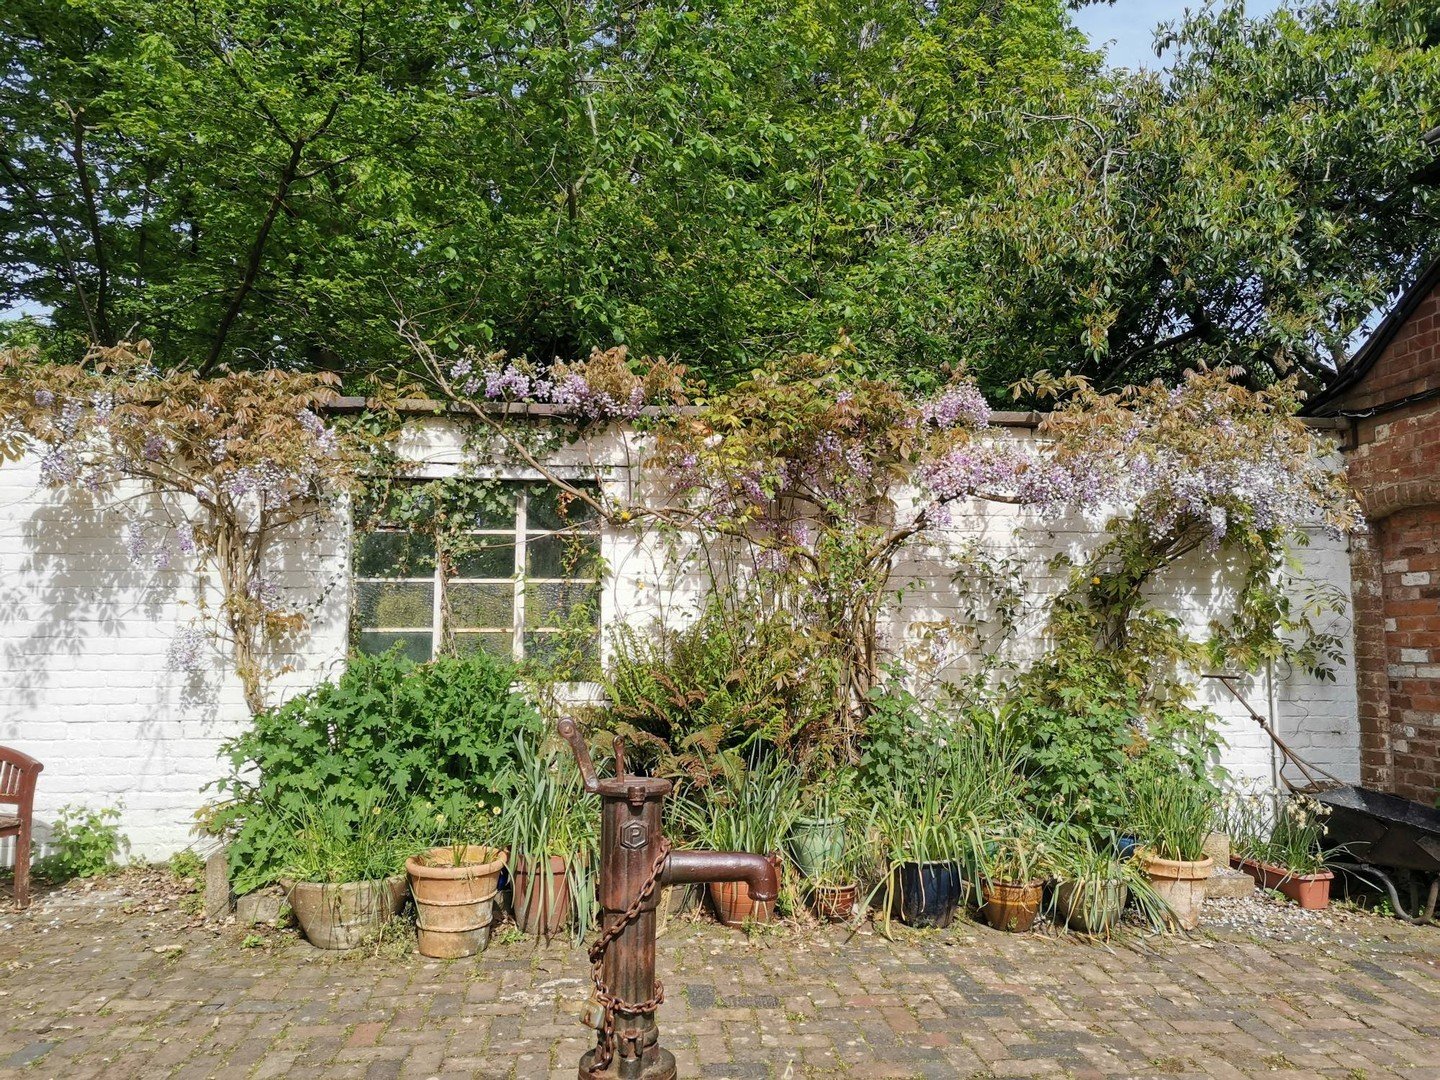 Saturday 22nd June we open for the National Garden Scheme
https://ngs.org.uk/gardens/the-river-school-wr3/#:~:text=A%20former%20Horticultural%20College%20garden,plots%20within%20a%20walled%20garden.